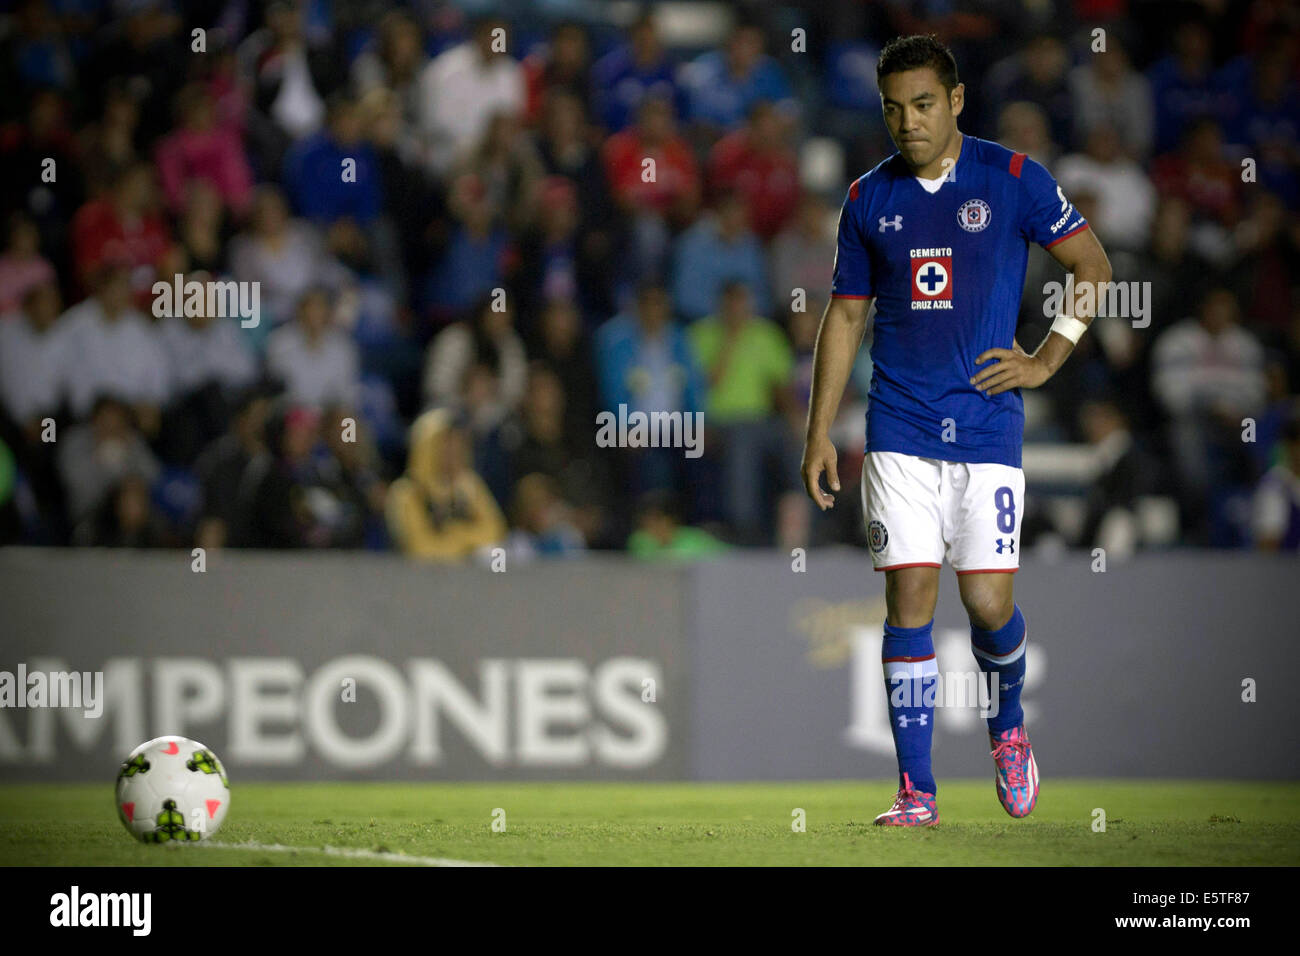 Mexico City, Mexico. 5th Aug, 2014. Marco Fabian, of Mexico's Cruz Azul, reacts during a match of groups first phase of CONCACAF's Champions League 2014-2015, against Costa Rica's Alajuelense, held at Azul Stadium, in Mexico City, capital of Mexico, on Aug. 5, 2014. Credit:  Alejandro Ayala/Xinhua/Alamy Live News Stock Photo